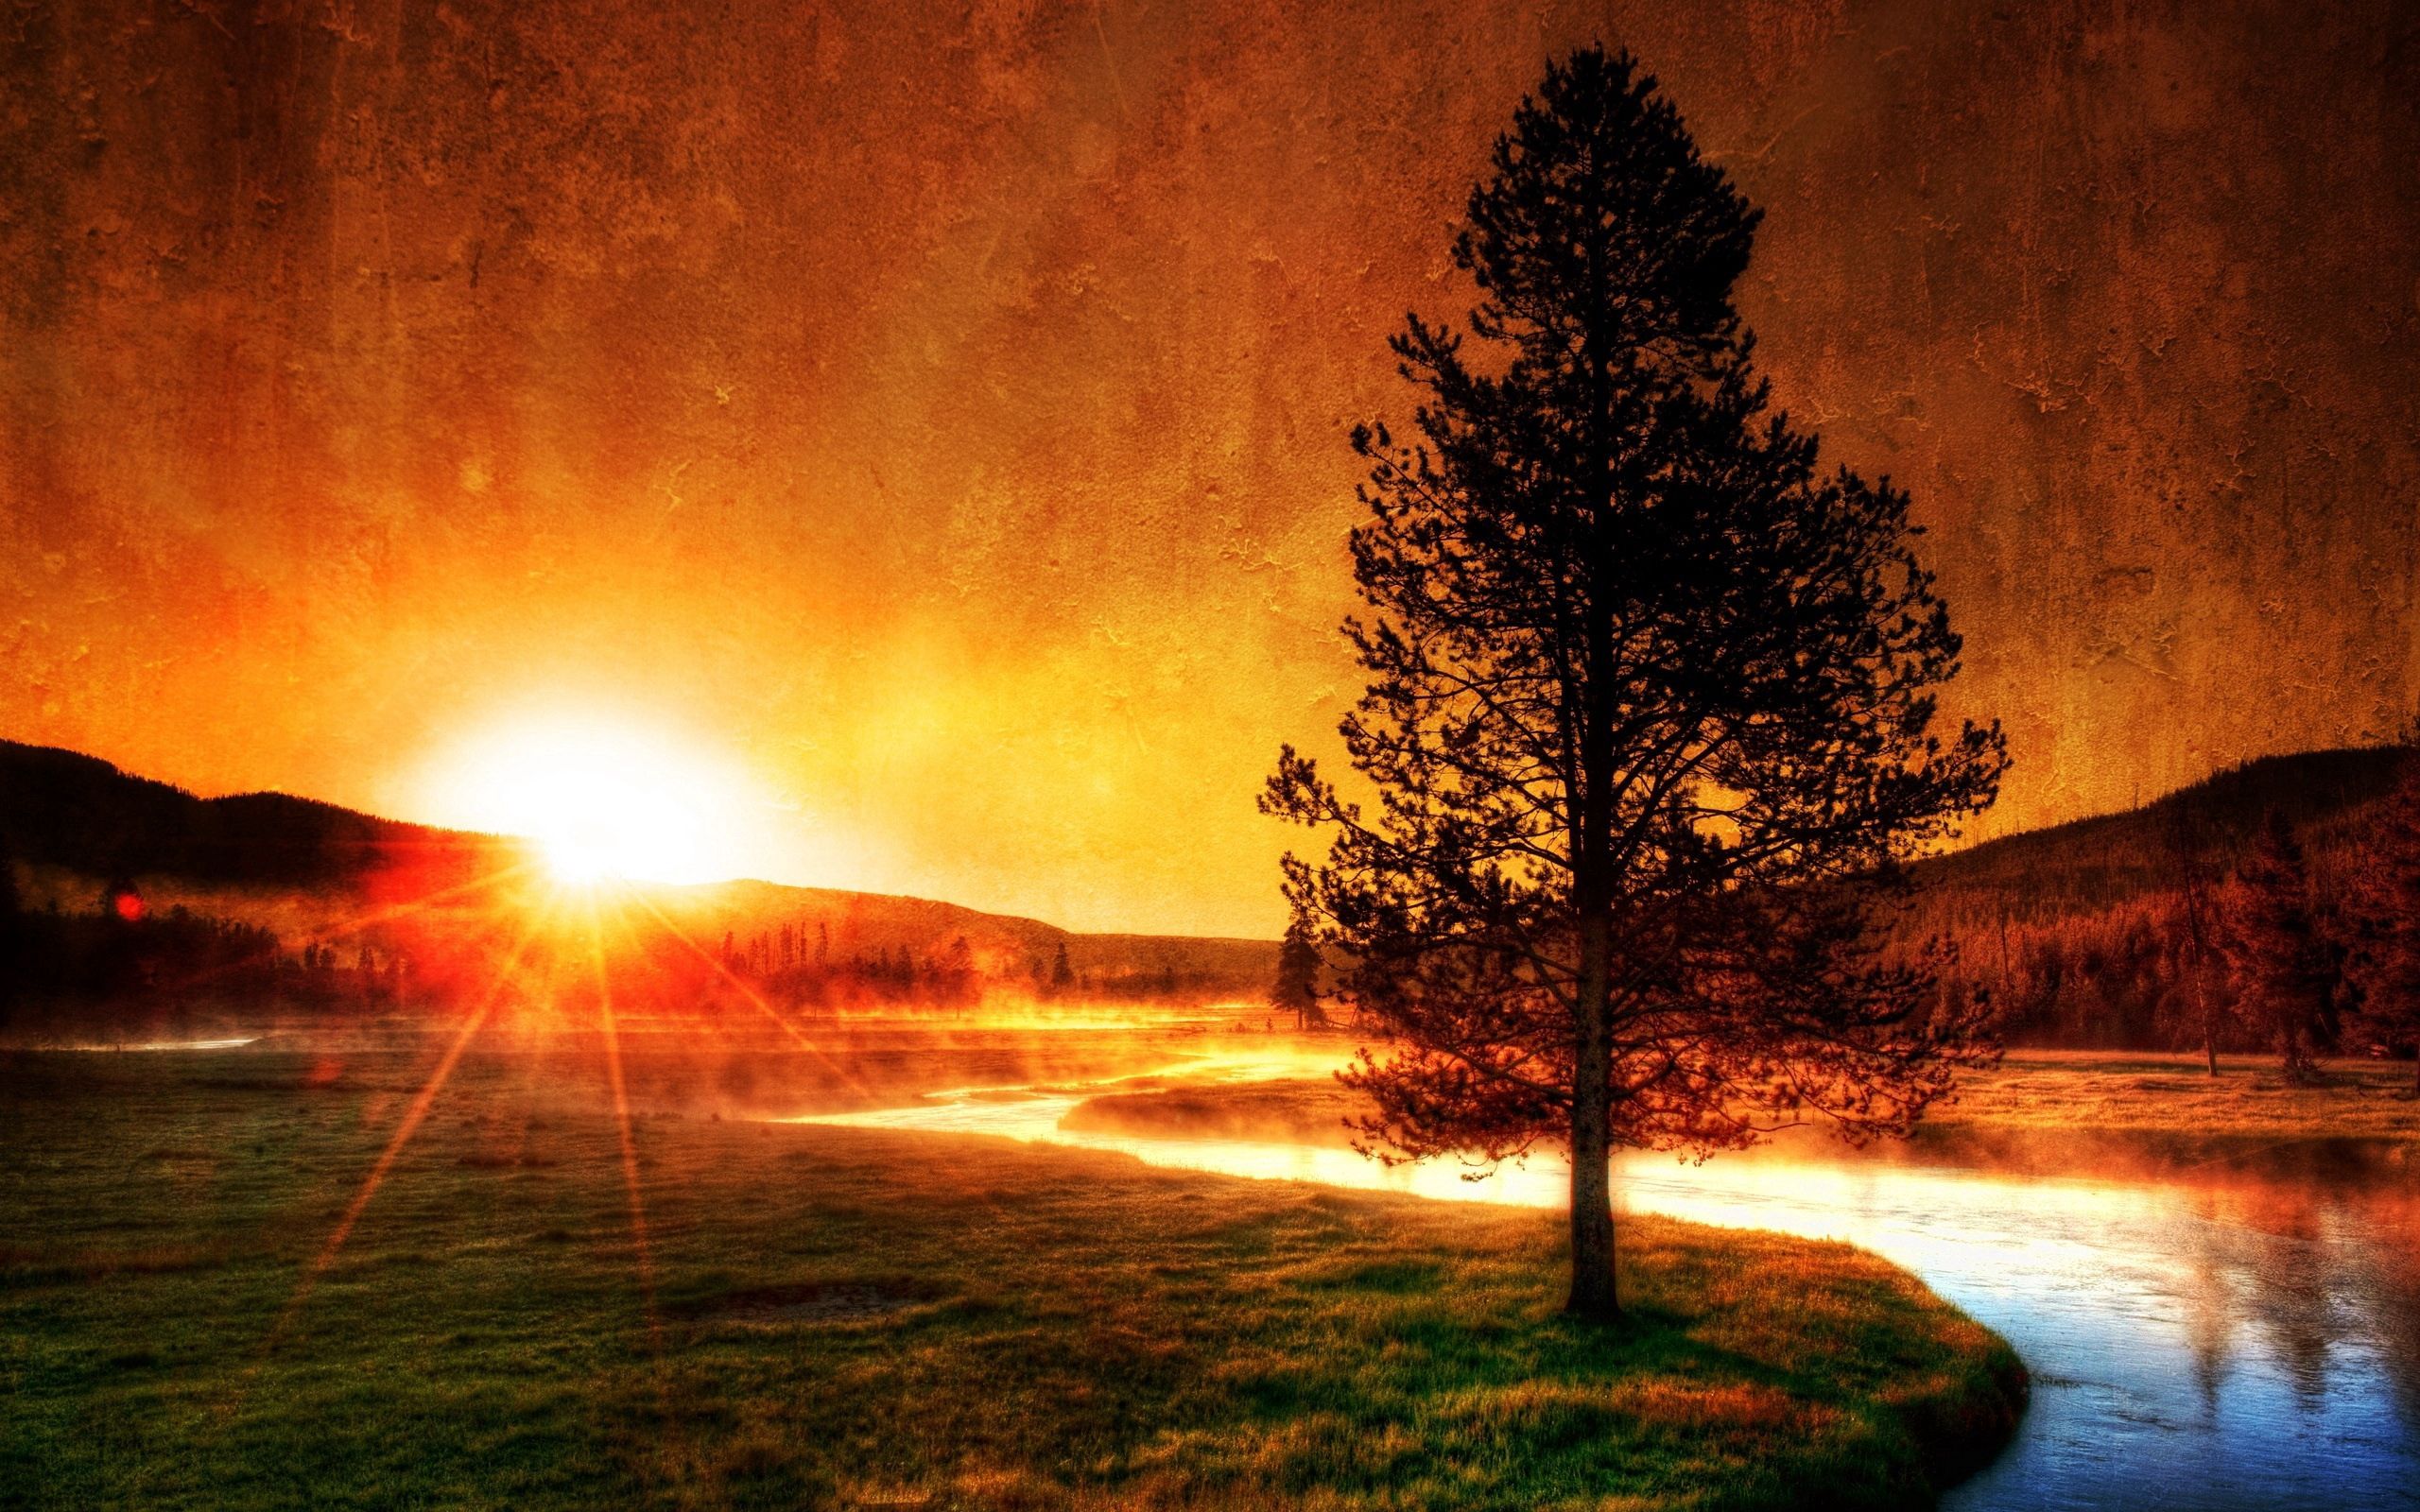 PC Wallpapers beams, nature, rivers, sunset, sun, wood, rays, tree, fog, evening